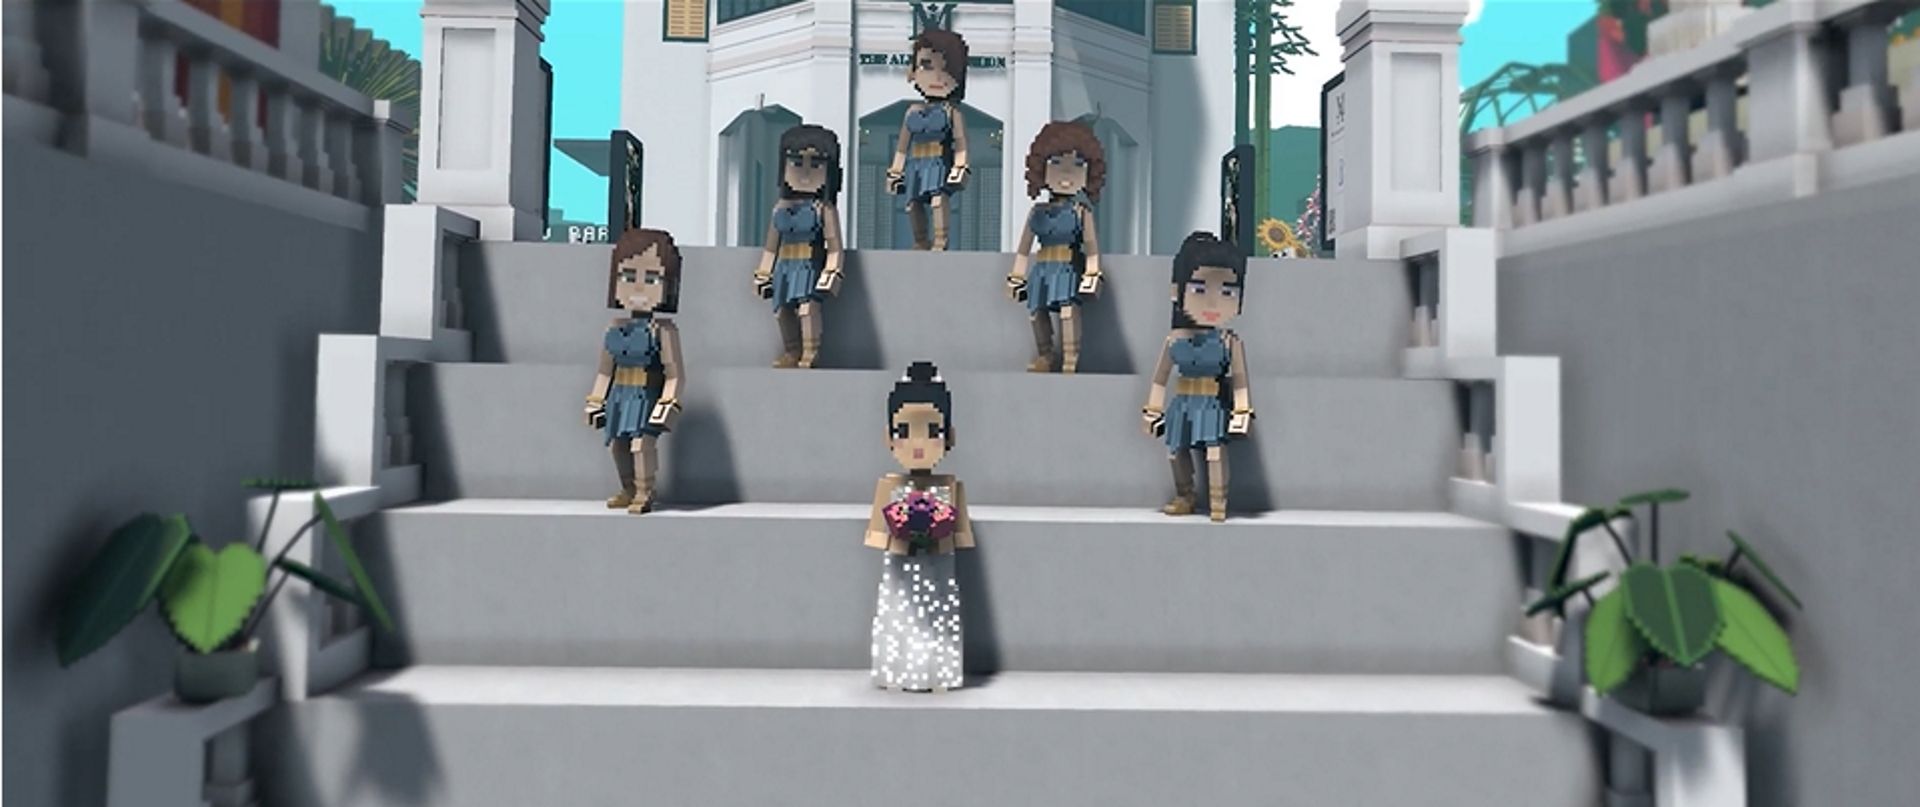 You Can Now Host A Wedding In The Metaverse And This Is What It Looks Like